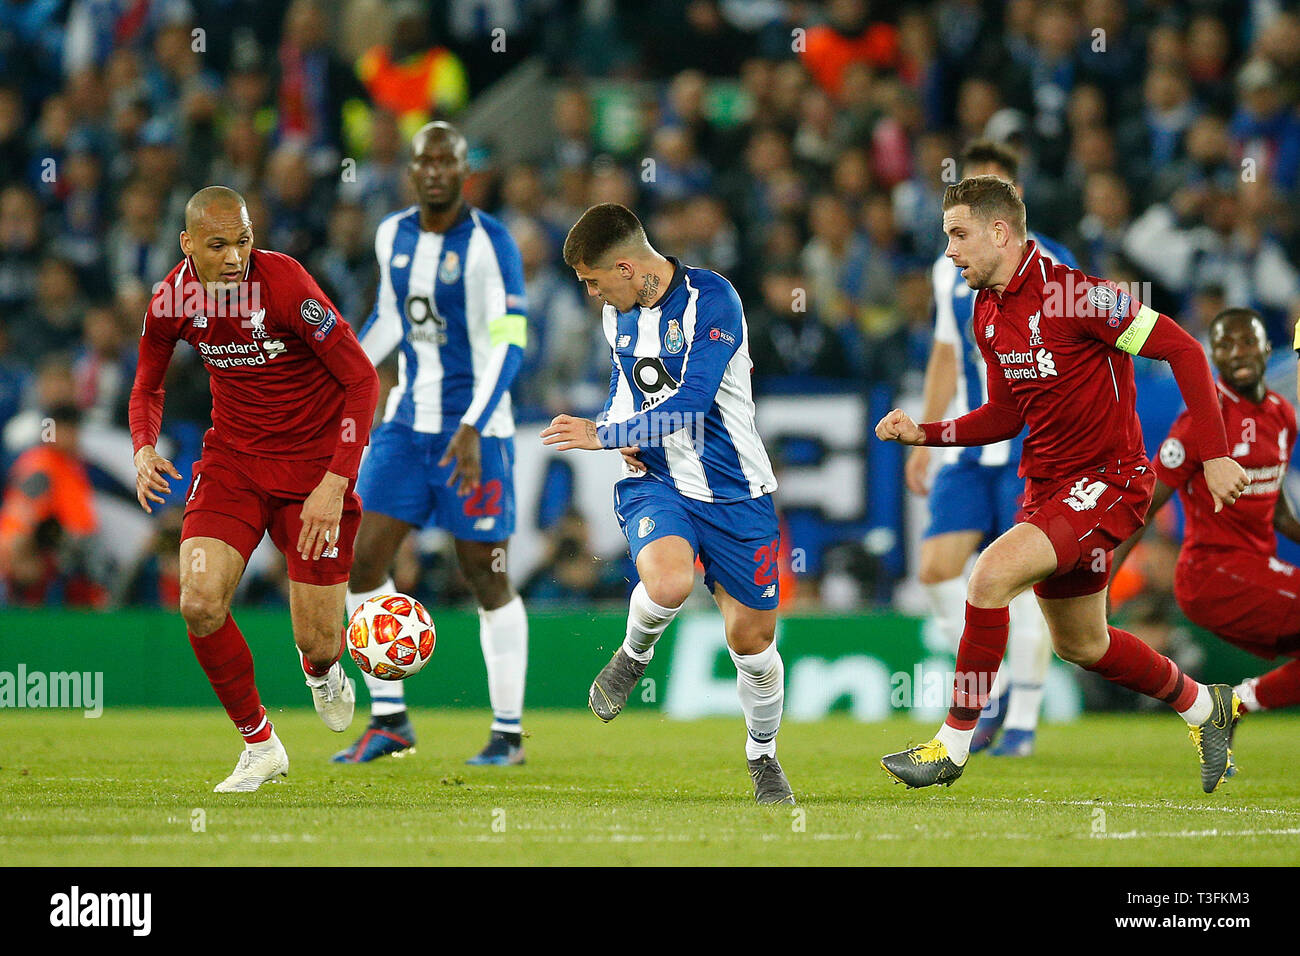 Liverpool, UK. 09th Apr, 2019. Fabinho of Liverpool, Otavio of FC Porto and Jordan Henderson of Liverpool in action during the UEFA Champions League Quarter Final first leg match between Liverpool and Porto at Anfield on April 9th 2019 in Liverpool Credit: PHC Images/Alamy Live News Stock Photo